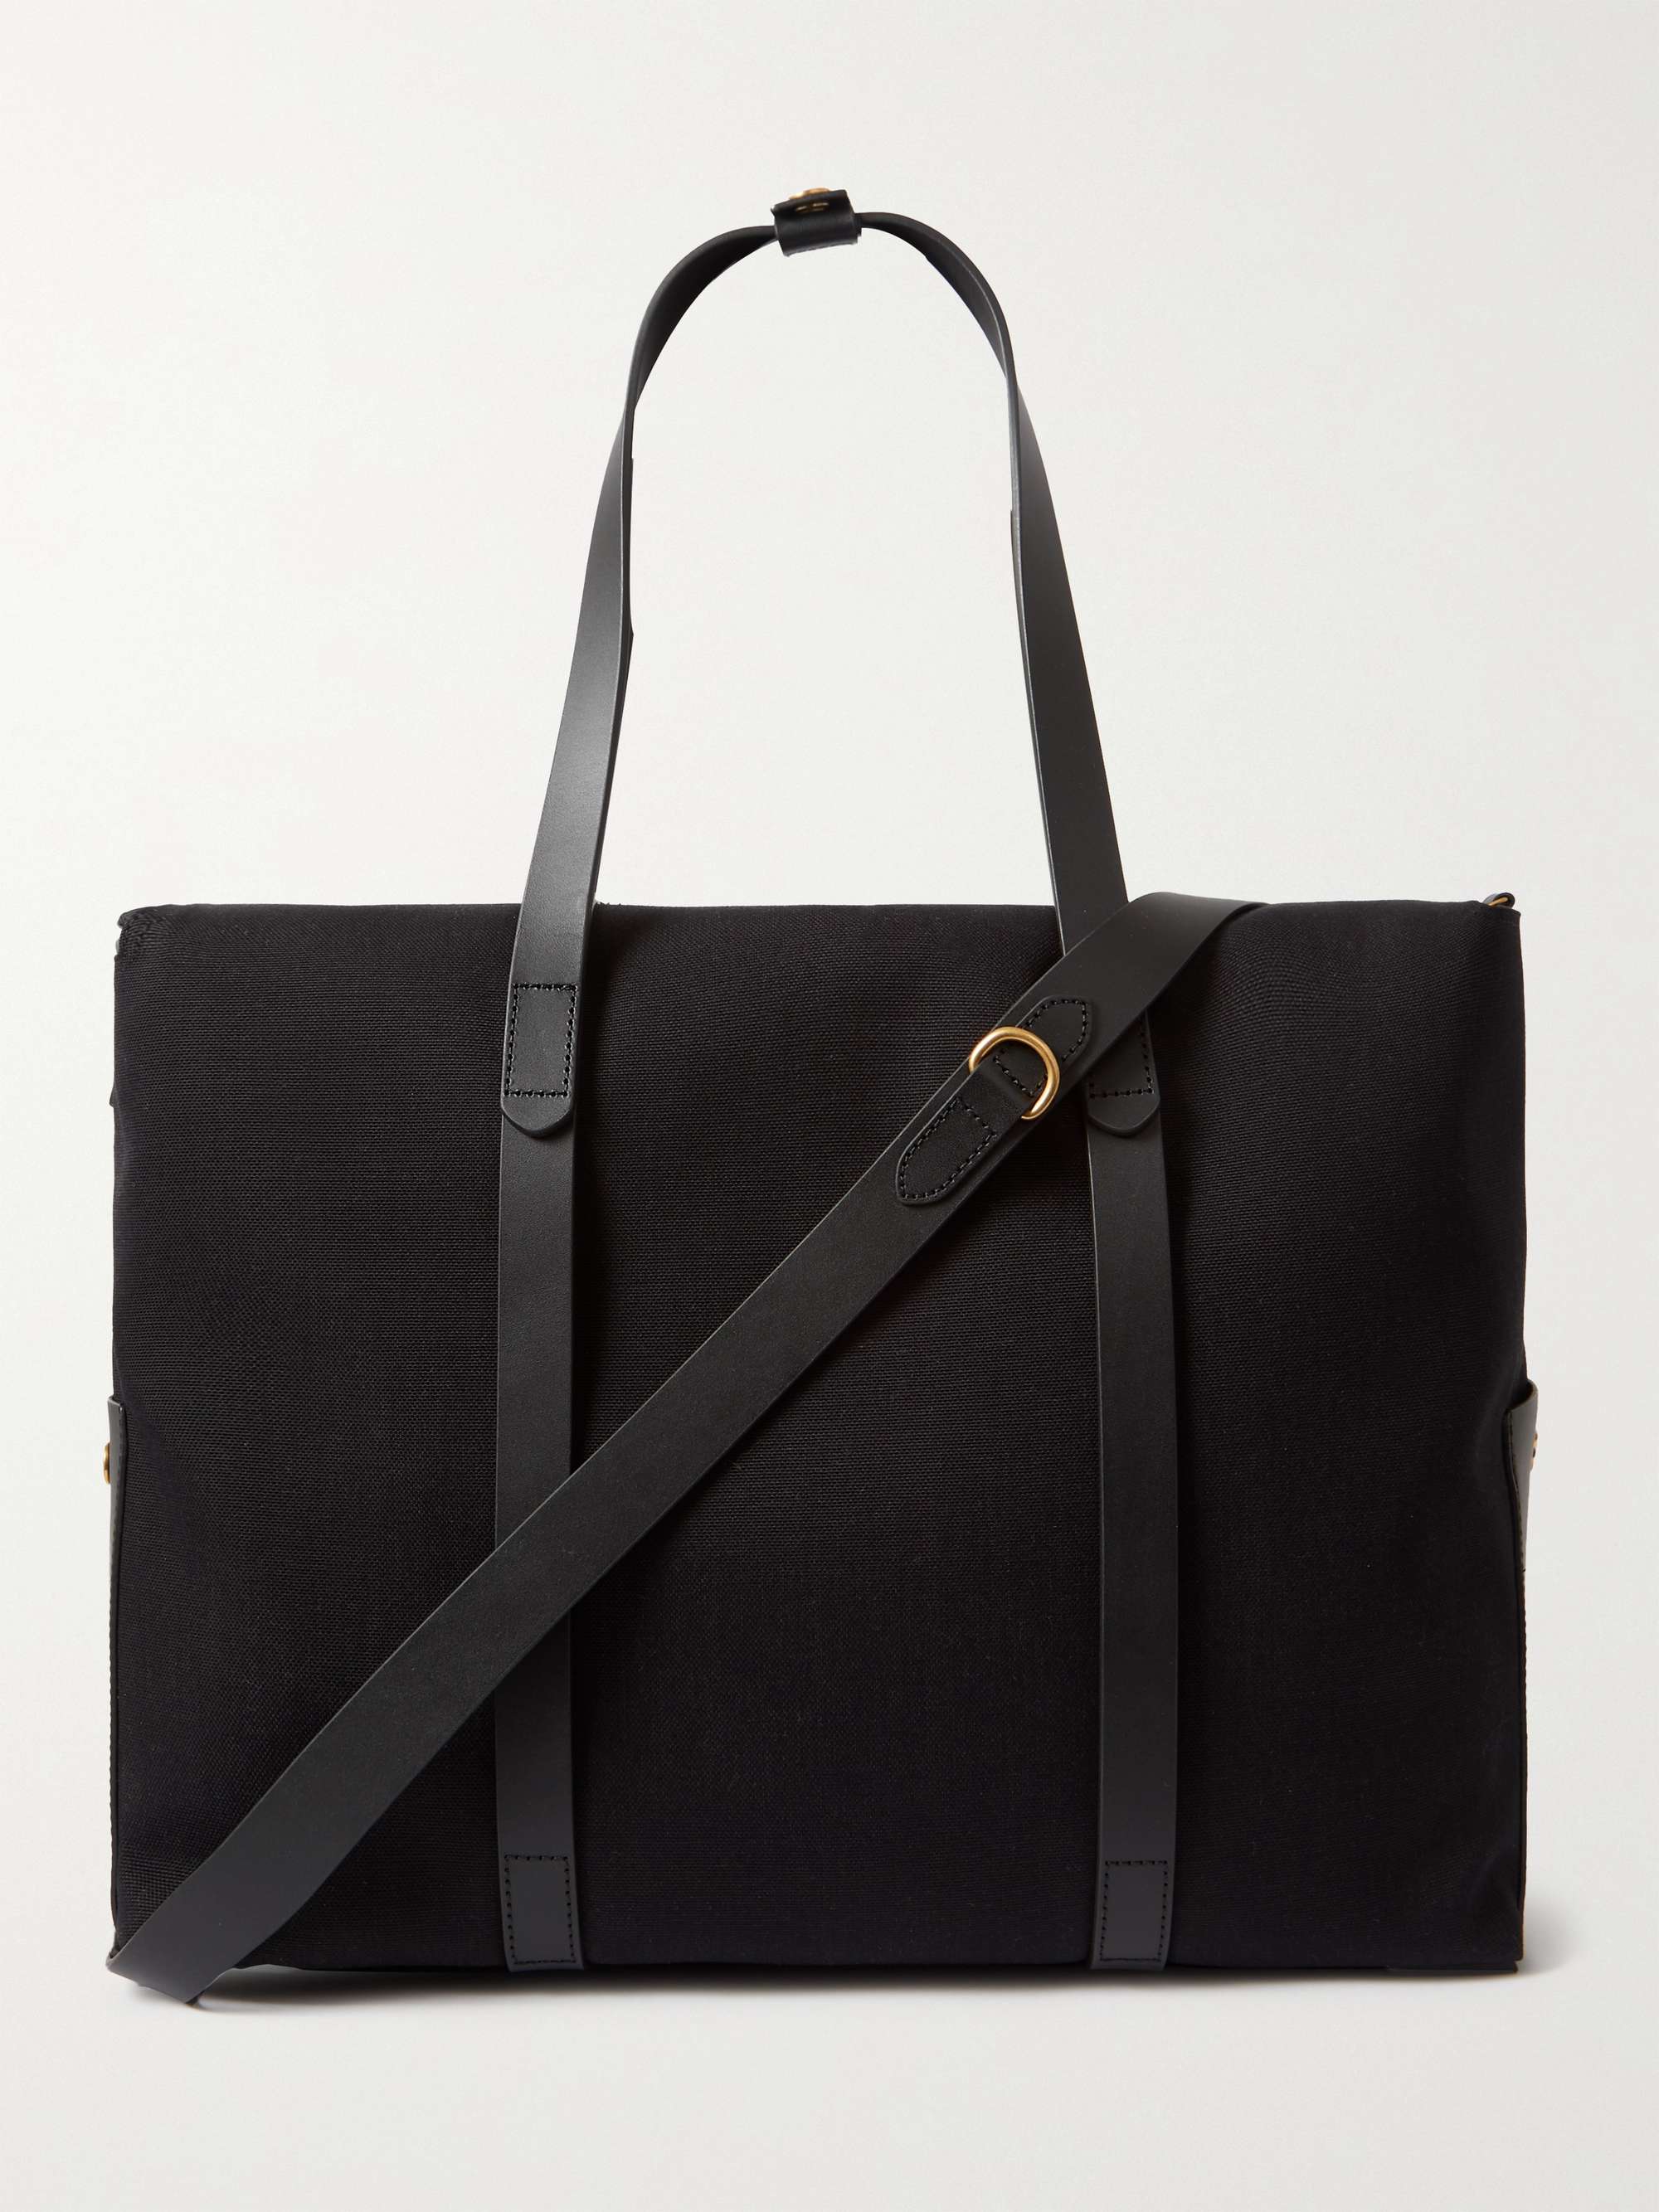 MISMO Leather-Trimmed Canvas Weekend Bag